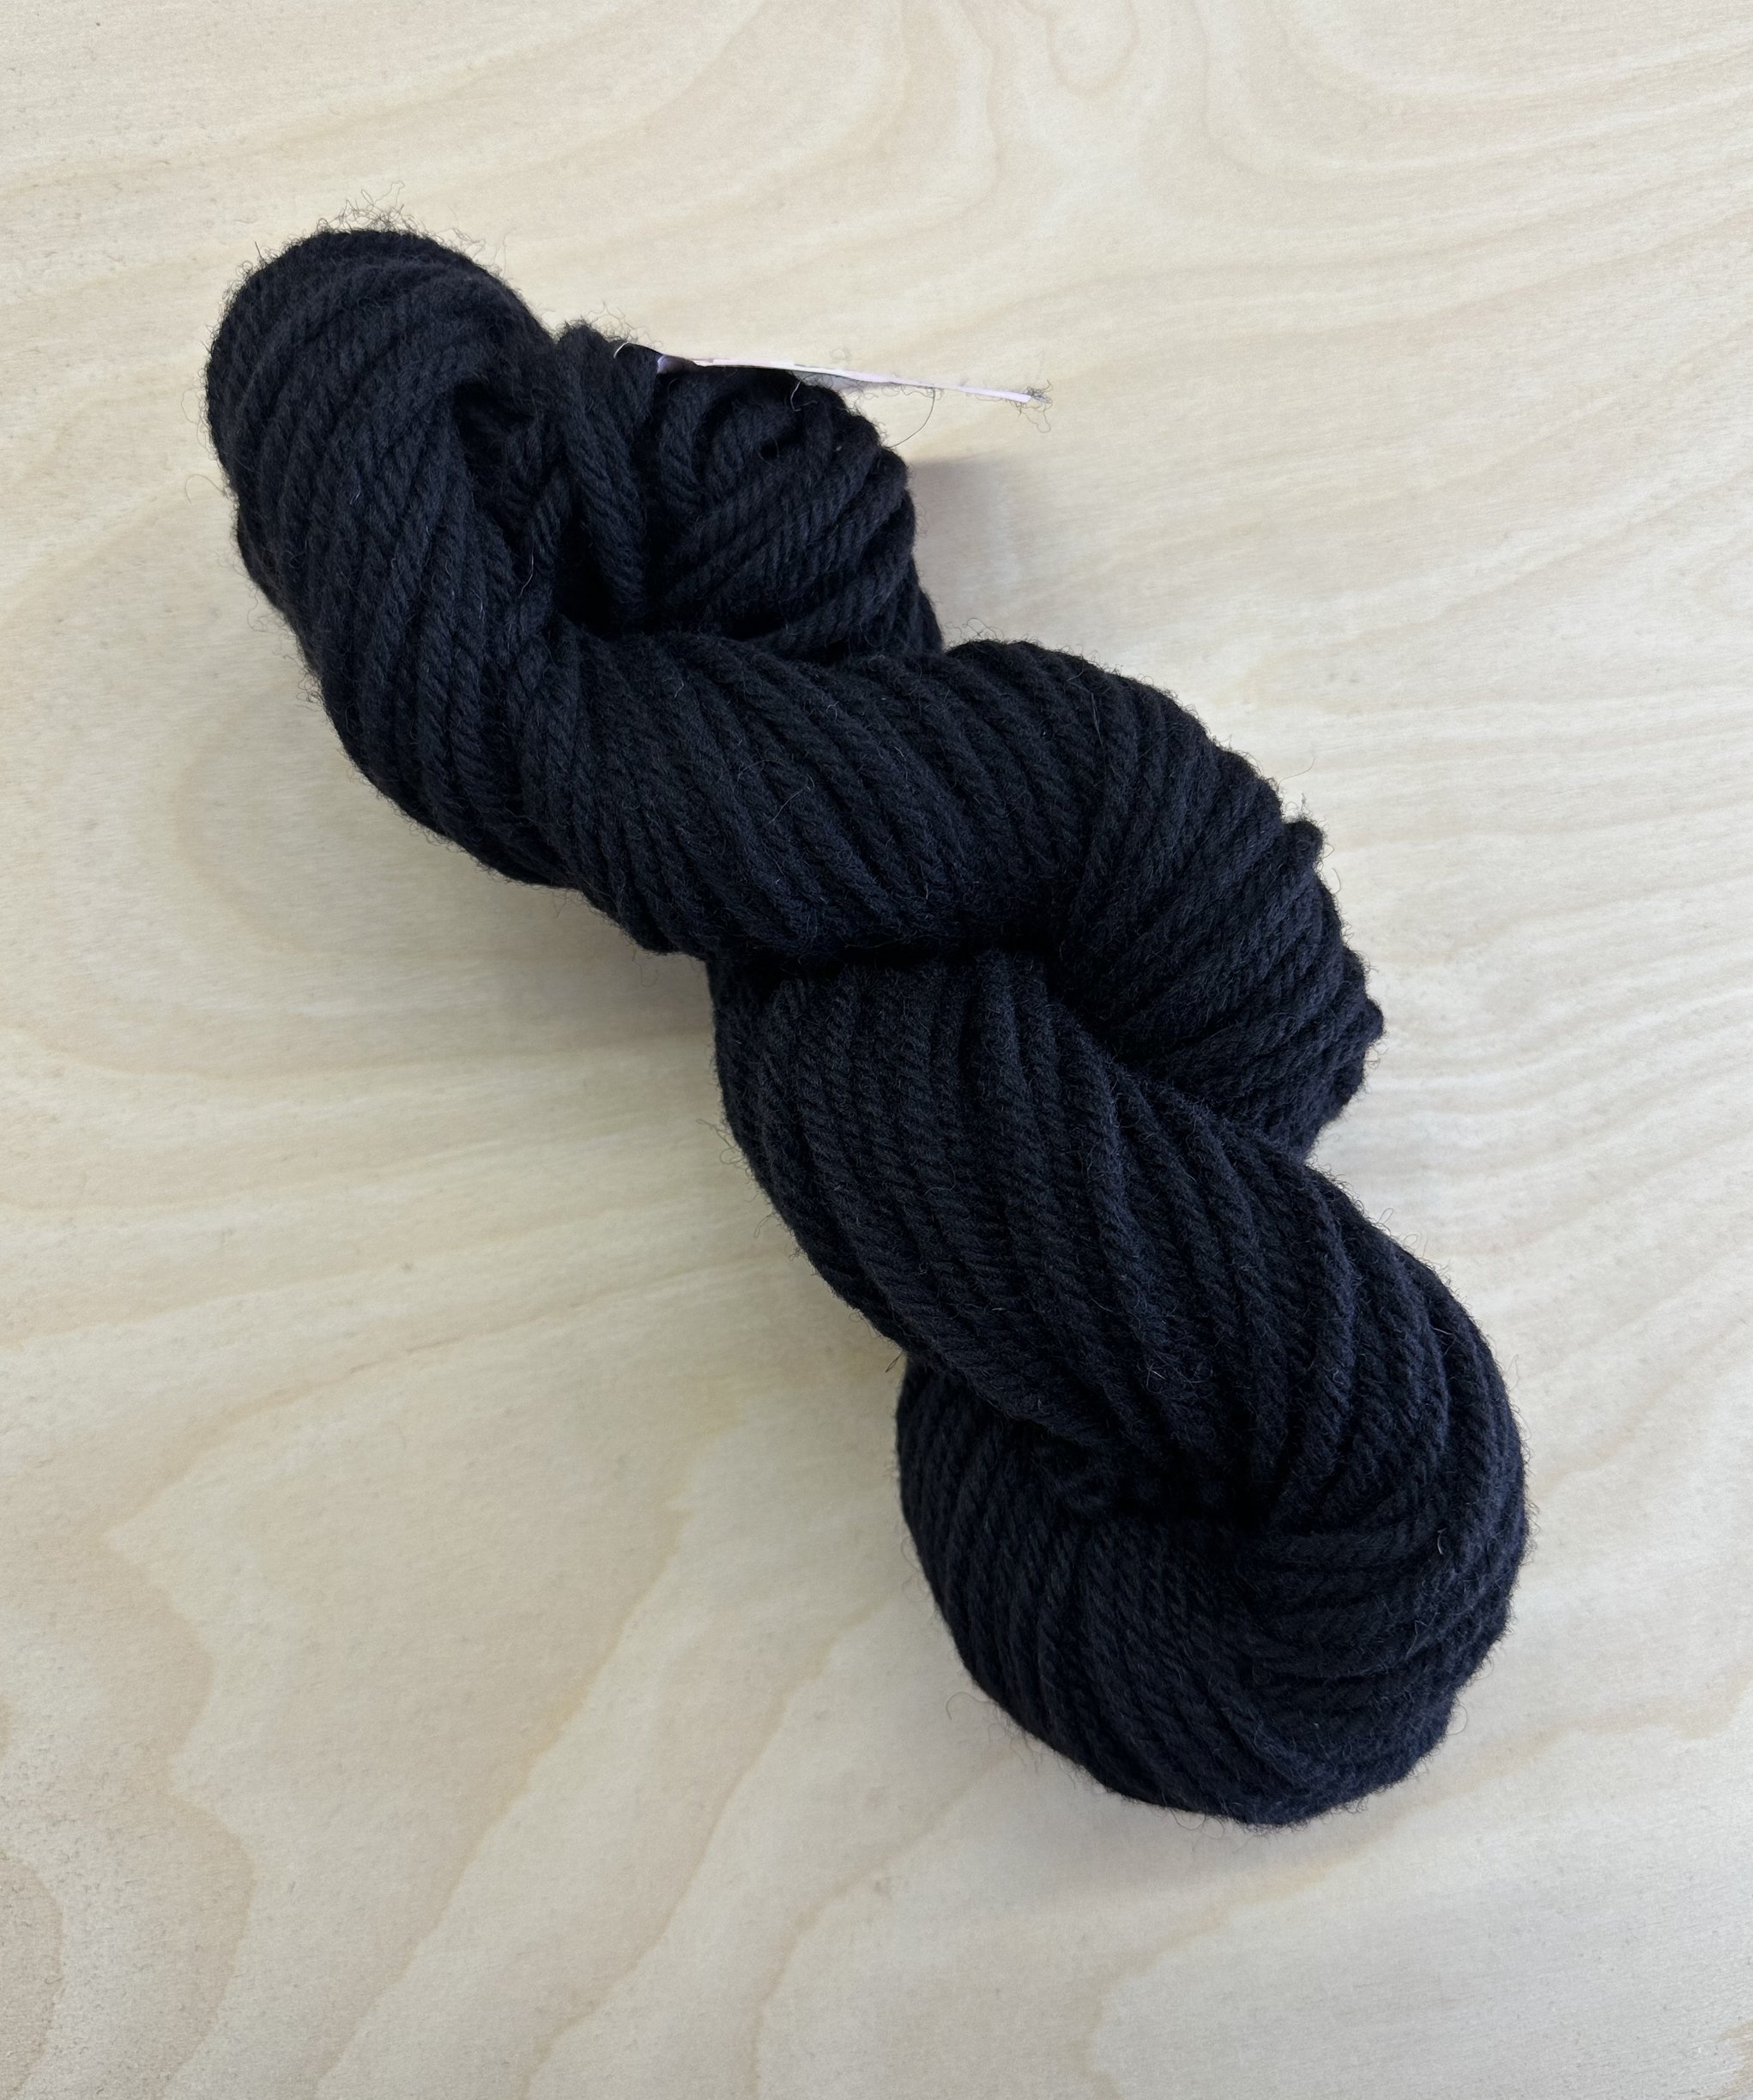 Black Yarn - 4 Ball Pack - Quality Yarn For Your Proud Project